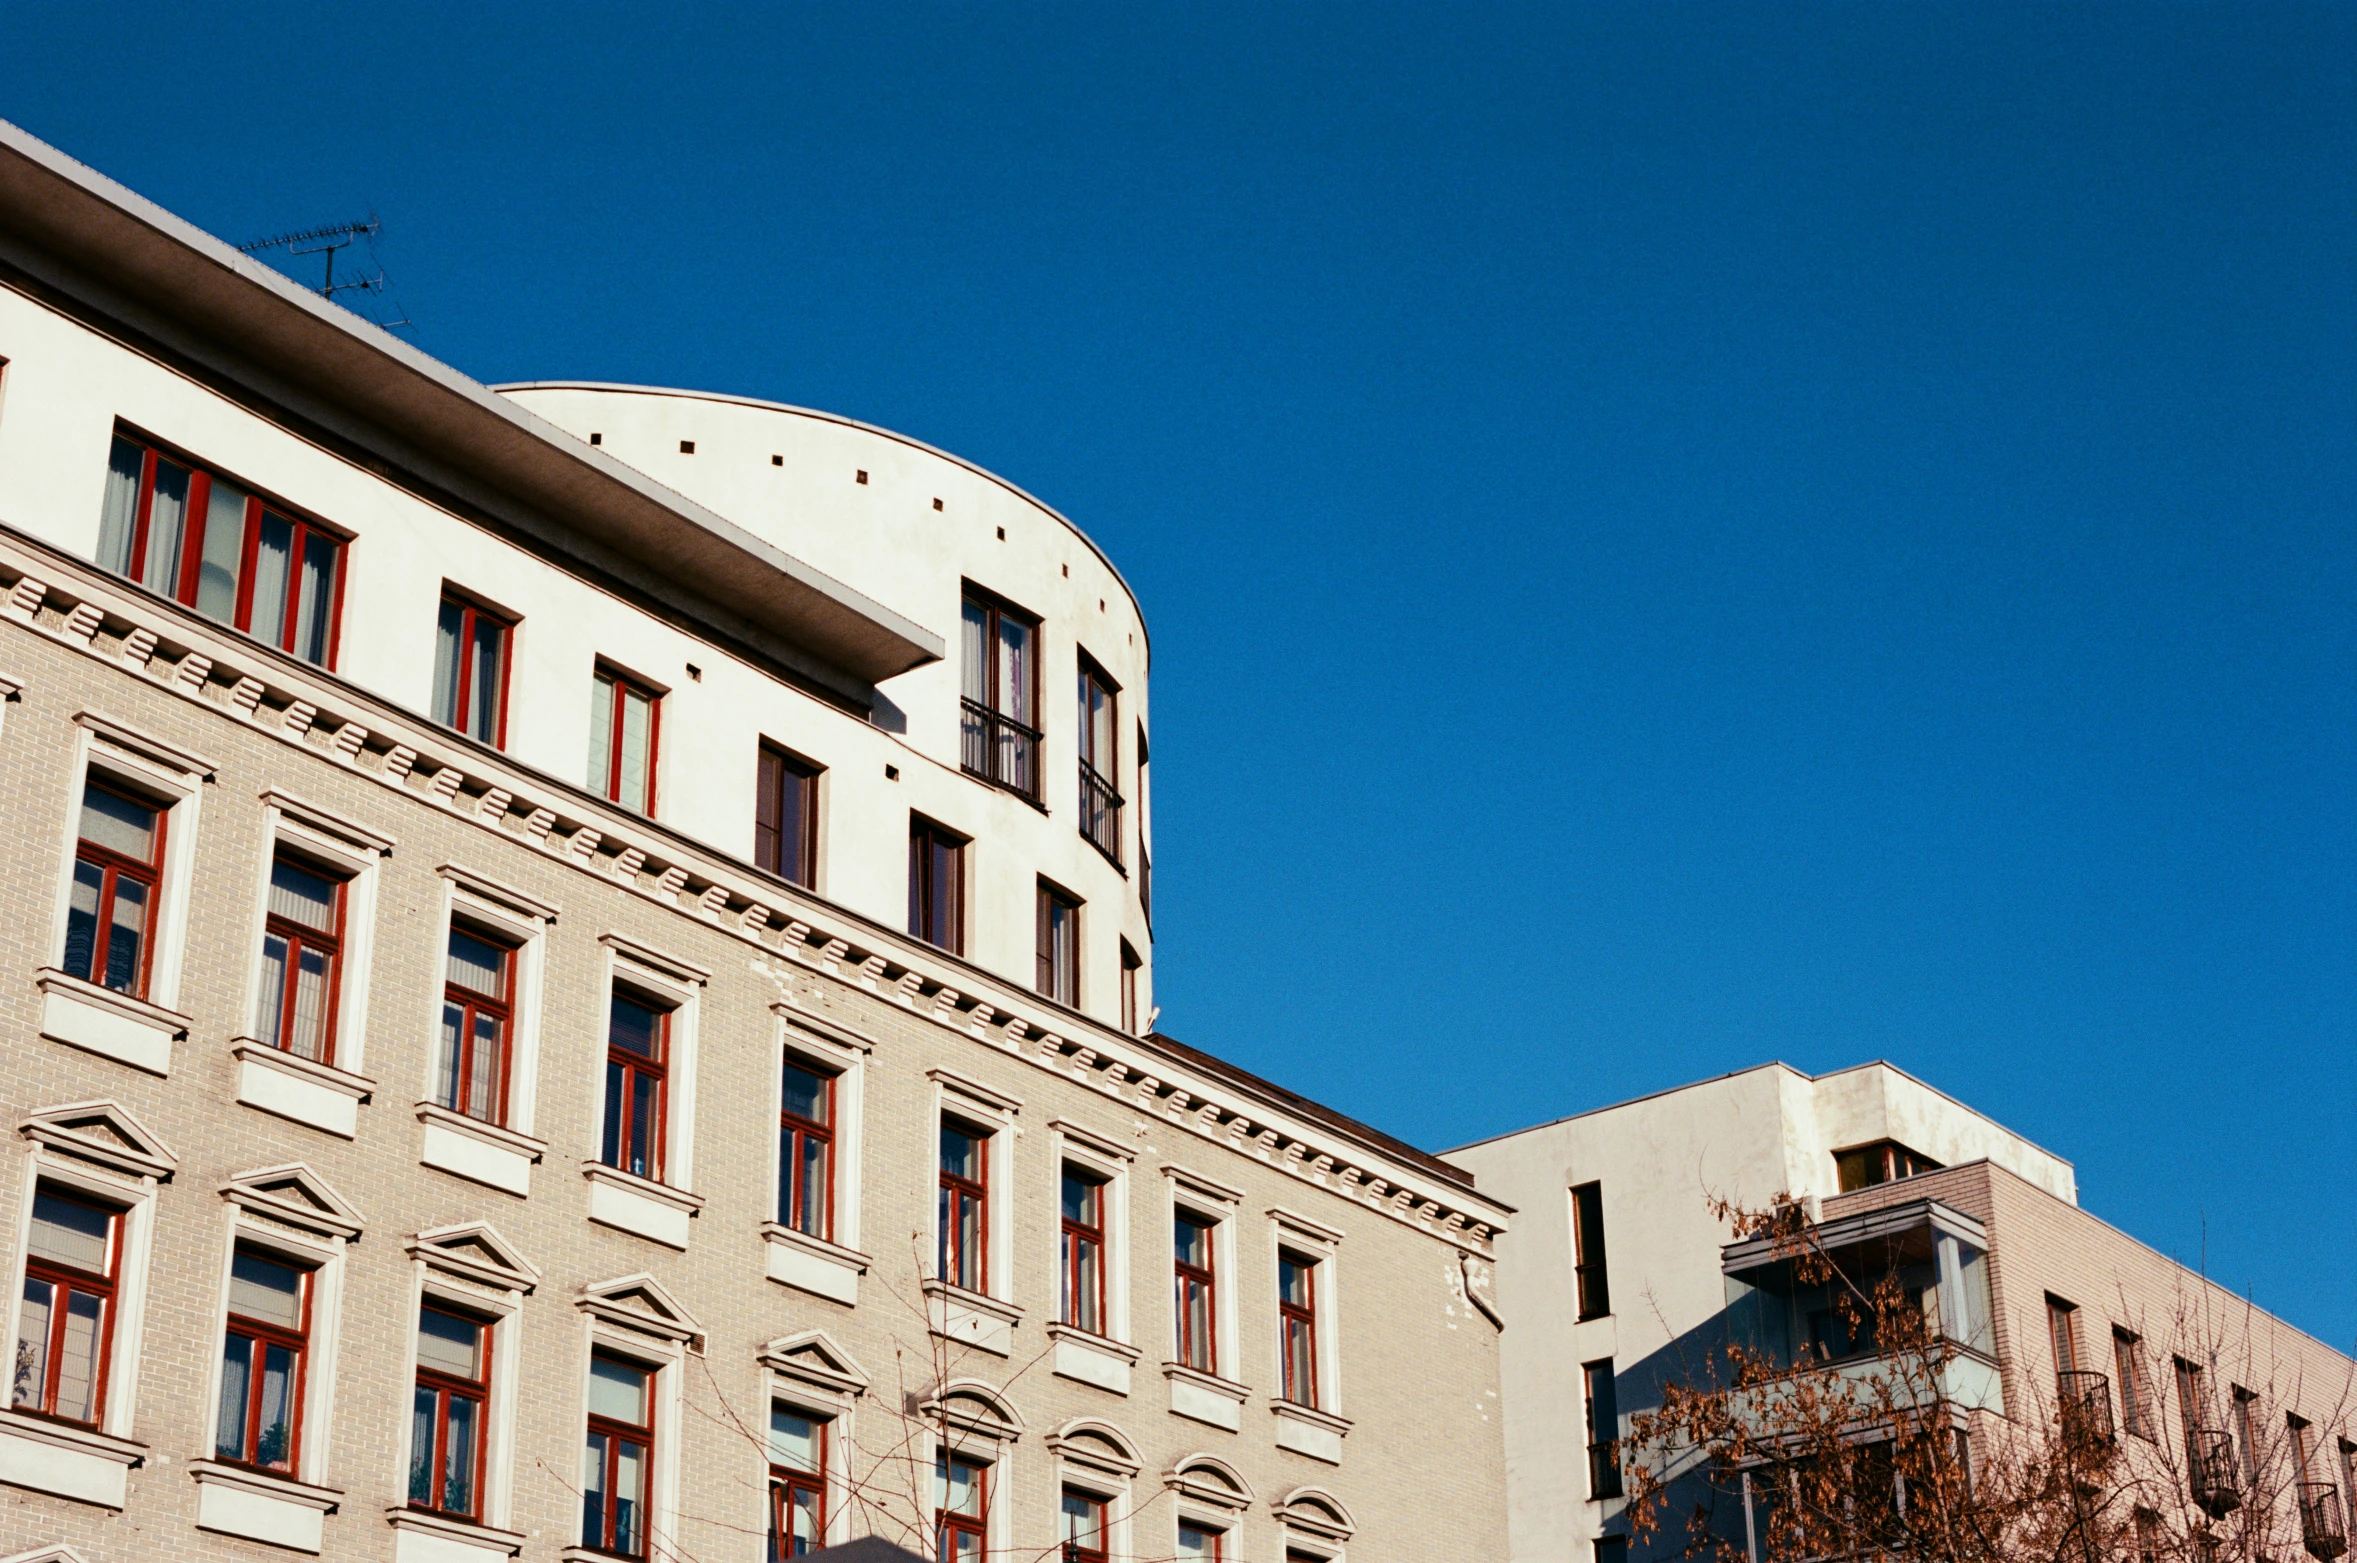 an older building stands with red windows and brown balconies